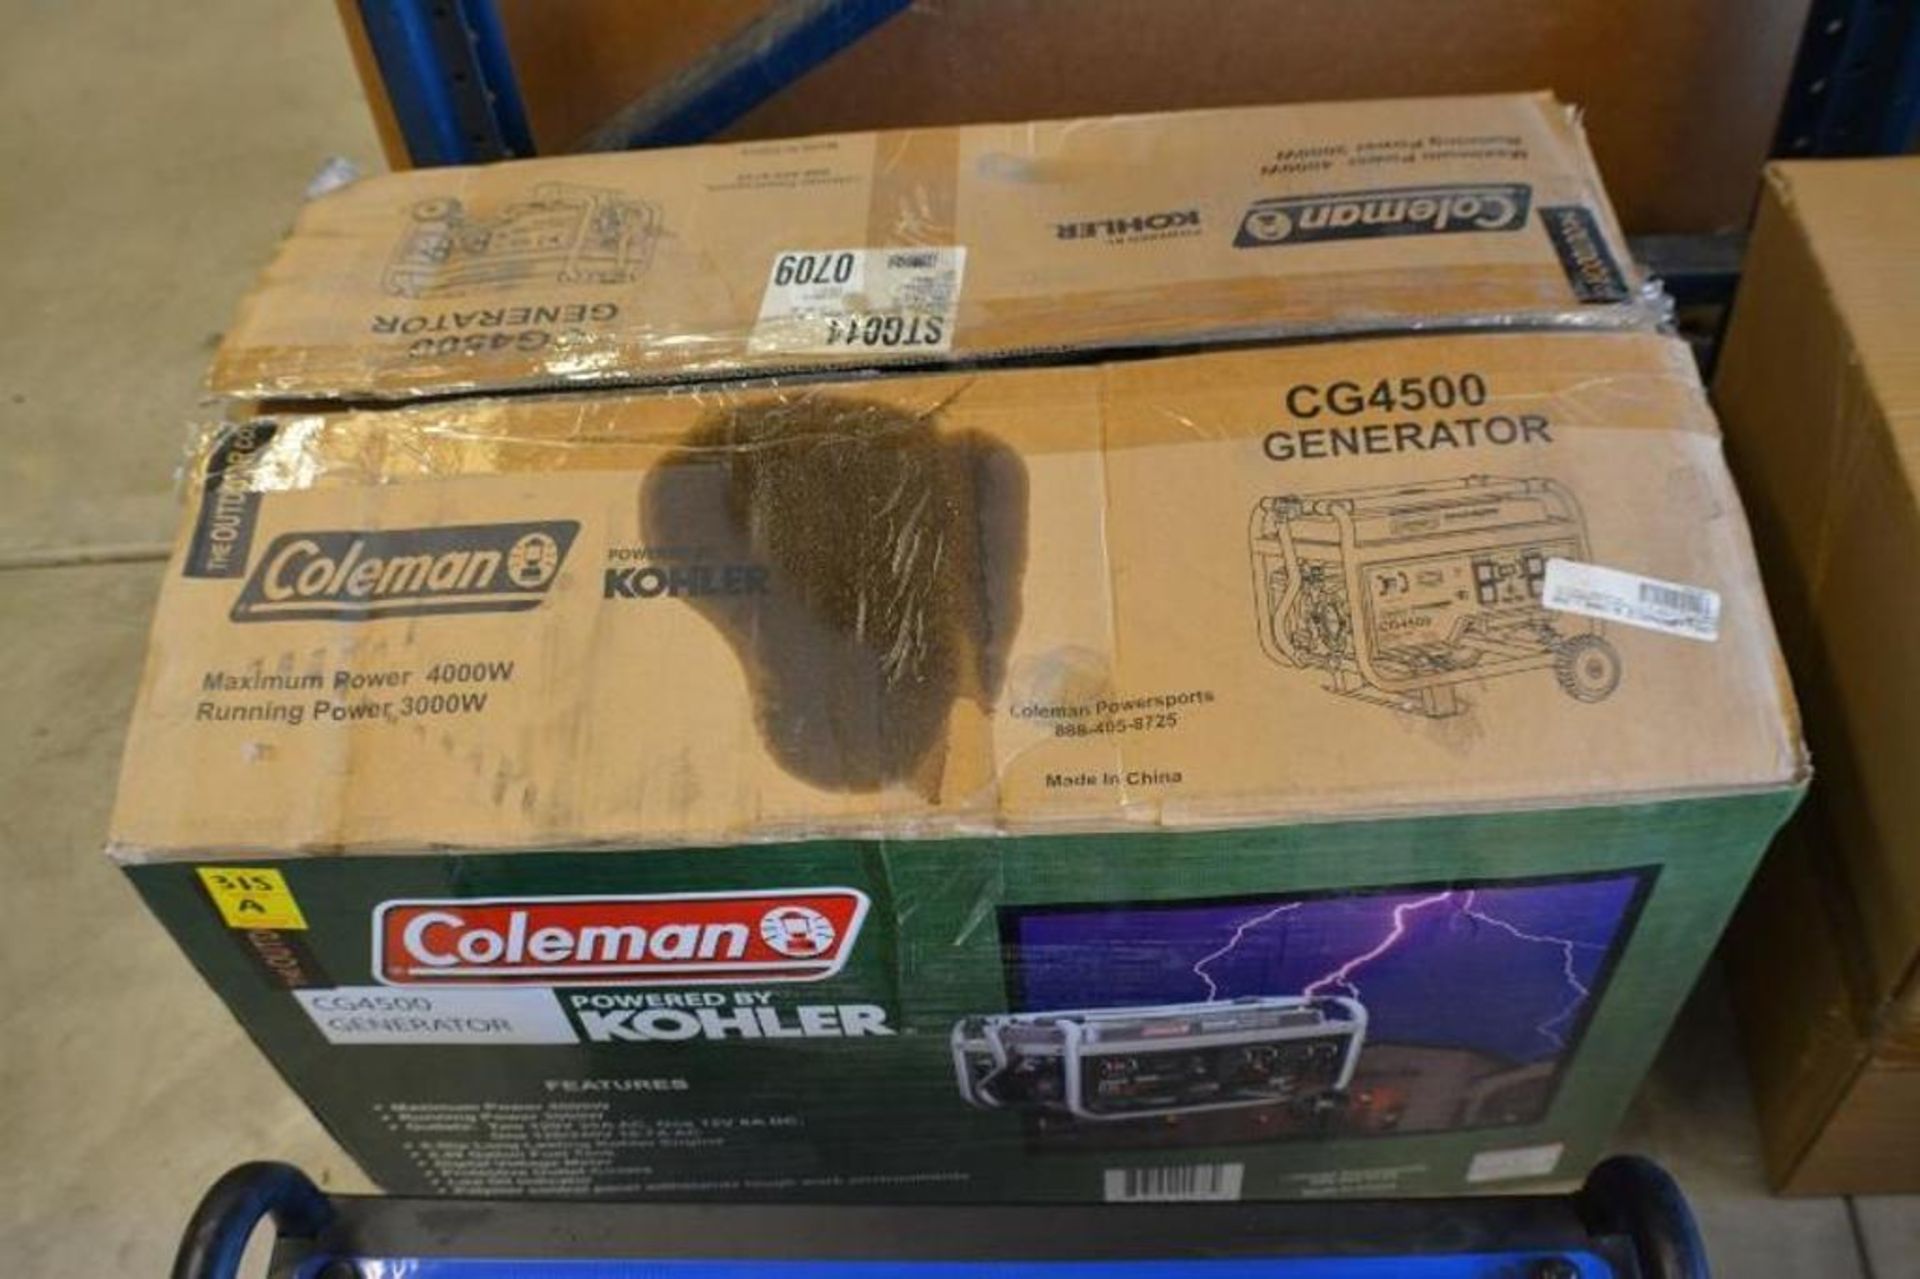 4000 Watts Gasoline Generator 6.5HP 120V with Electric Start by Coleman Powered by Kohler - Image 2 of 4